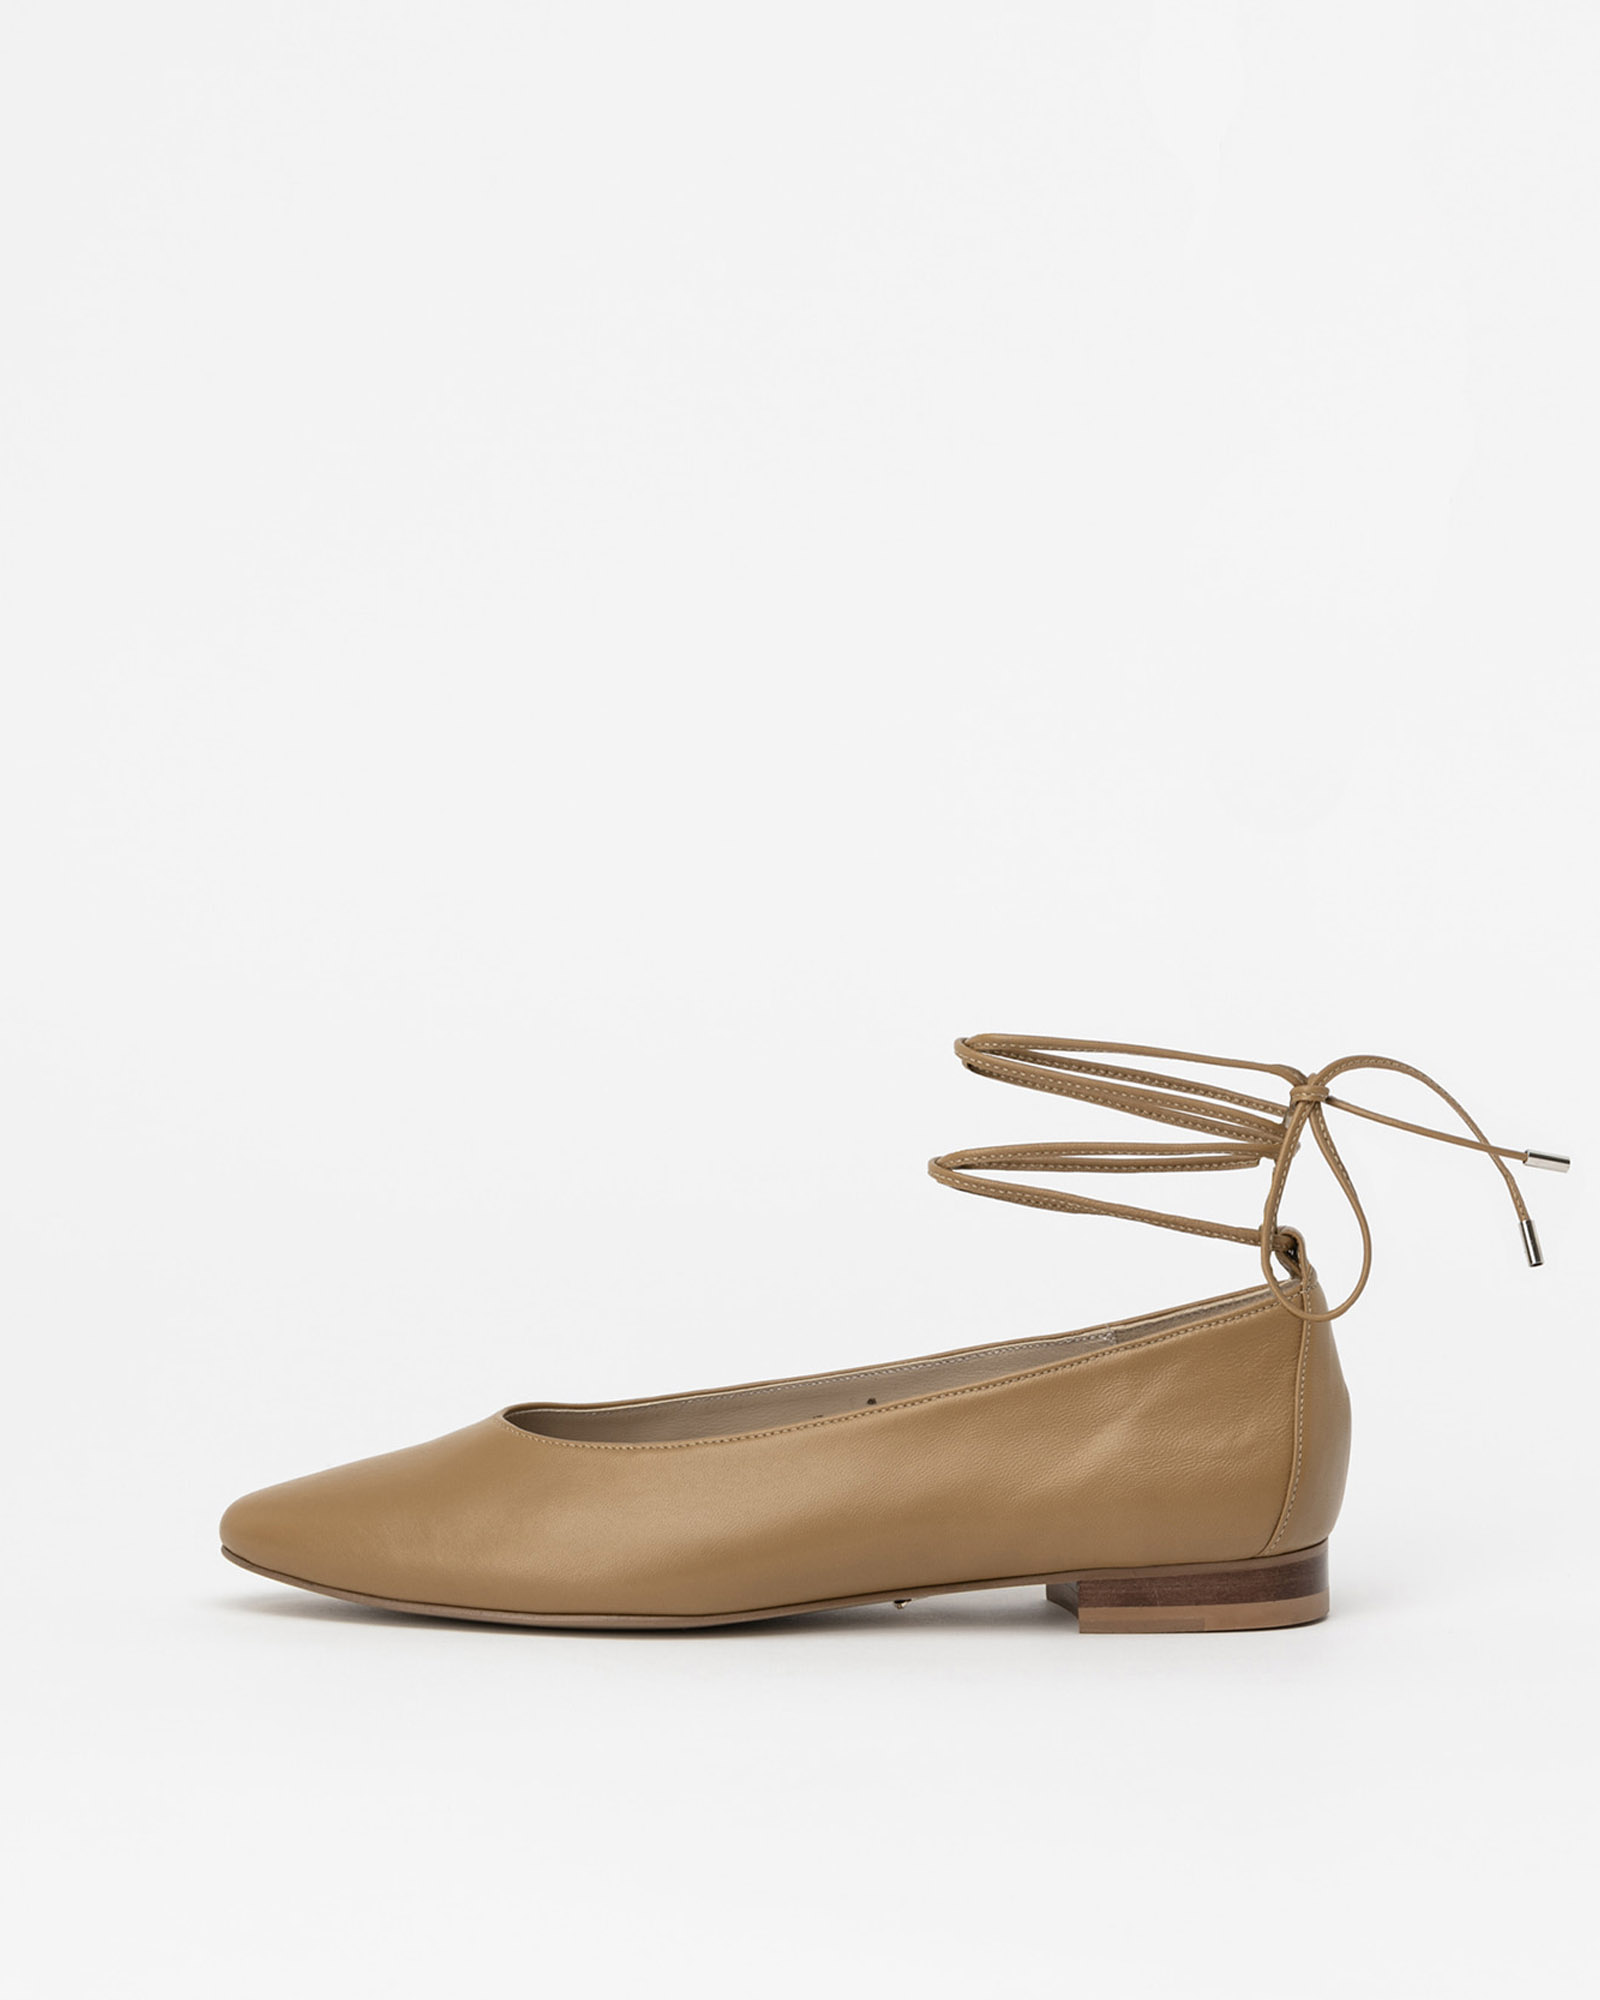 Prompton Strap Flat Shoes in Mud Brown